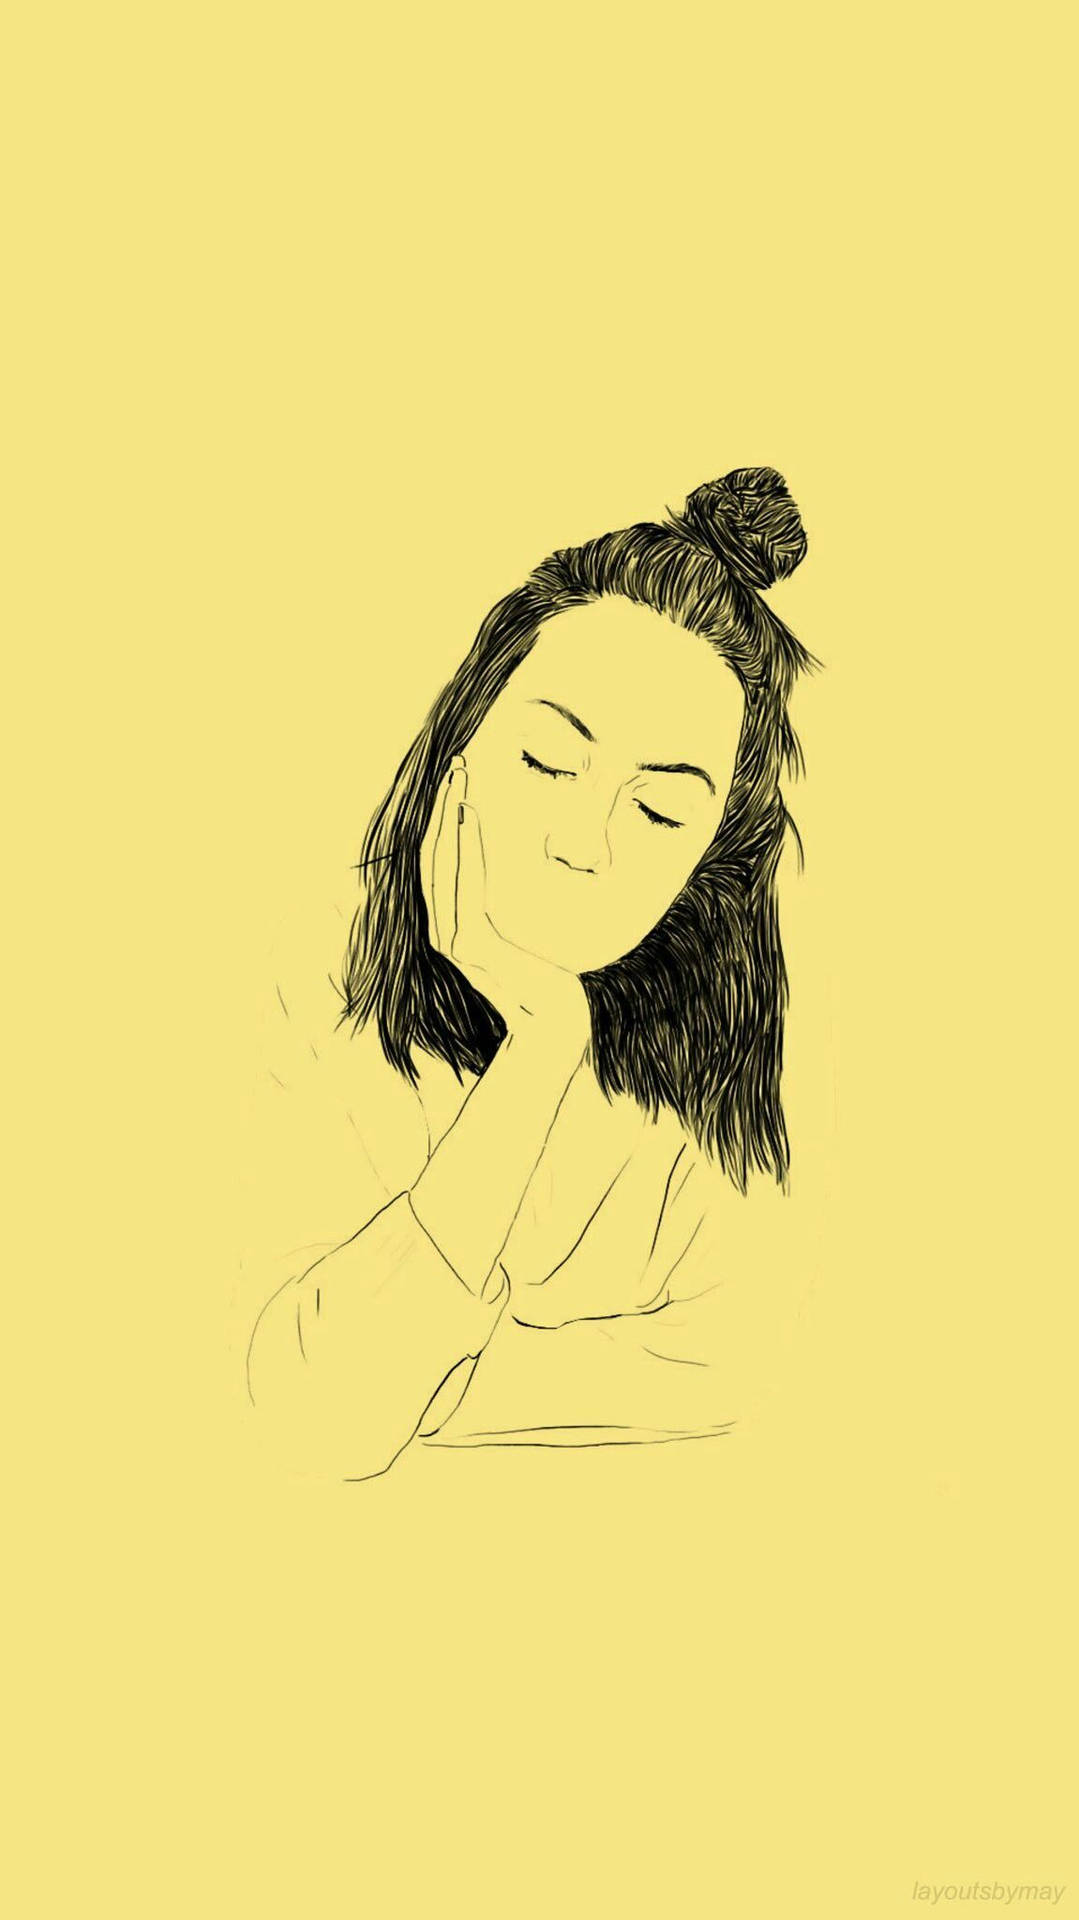 Pastel Yellow Aesthetic With Woman Sketch Background